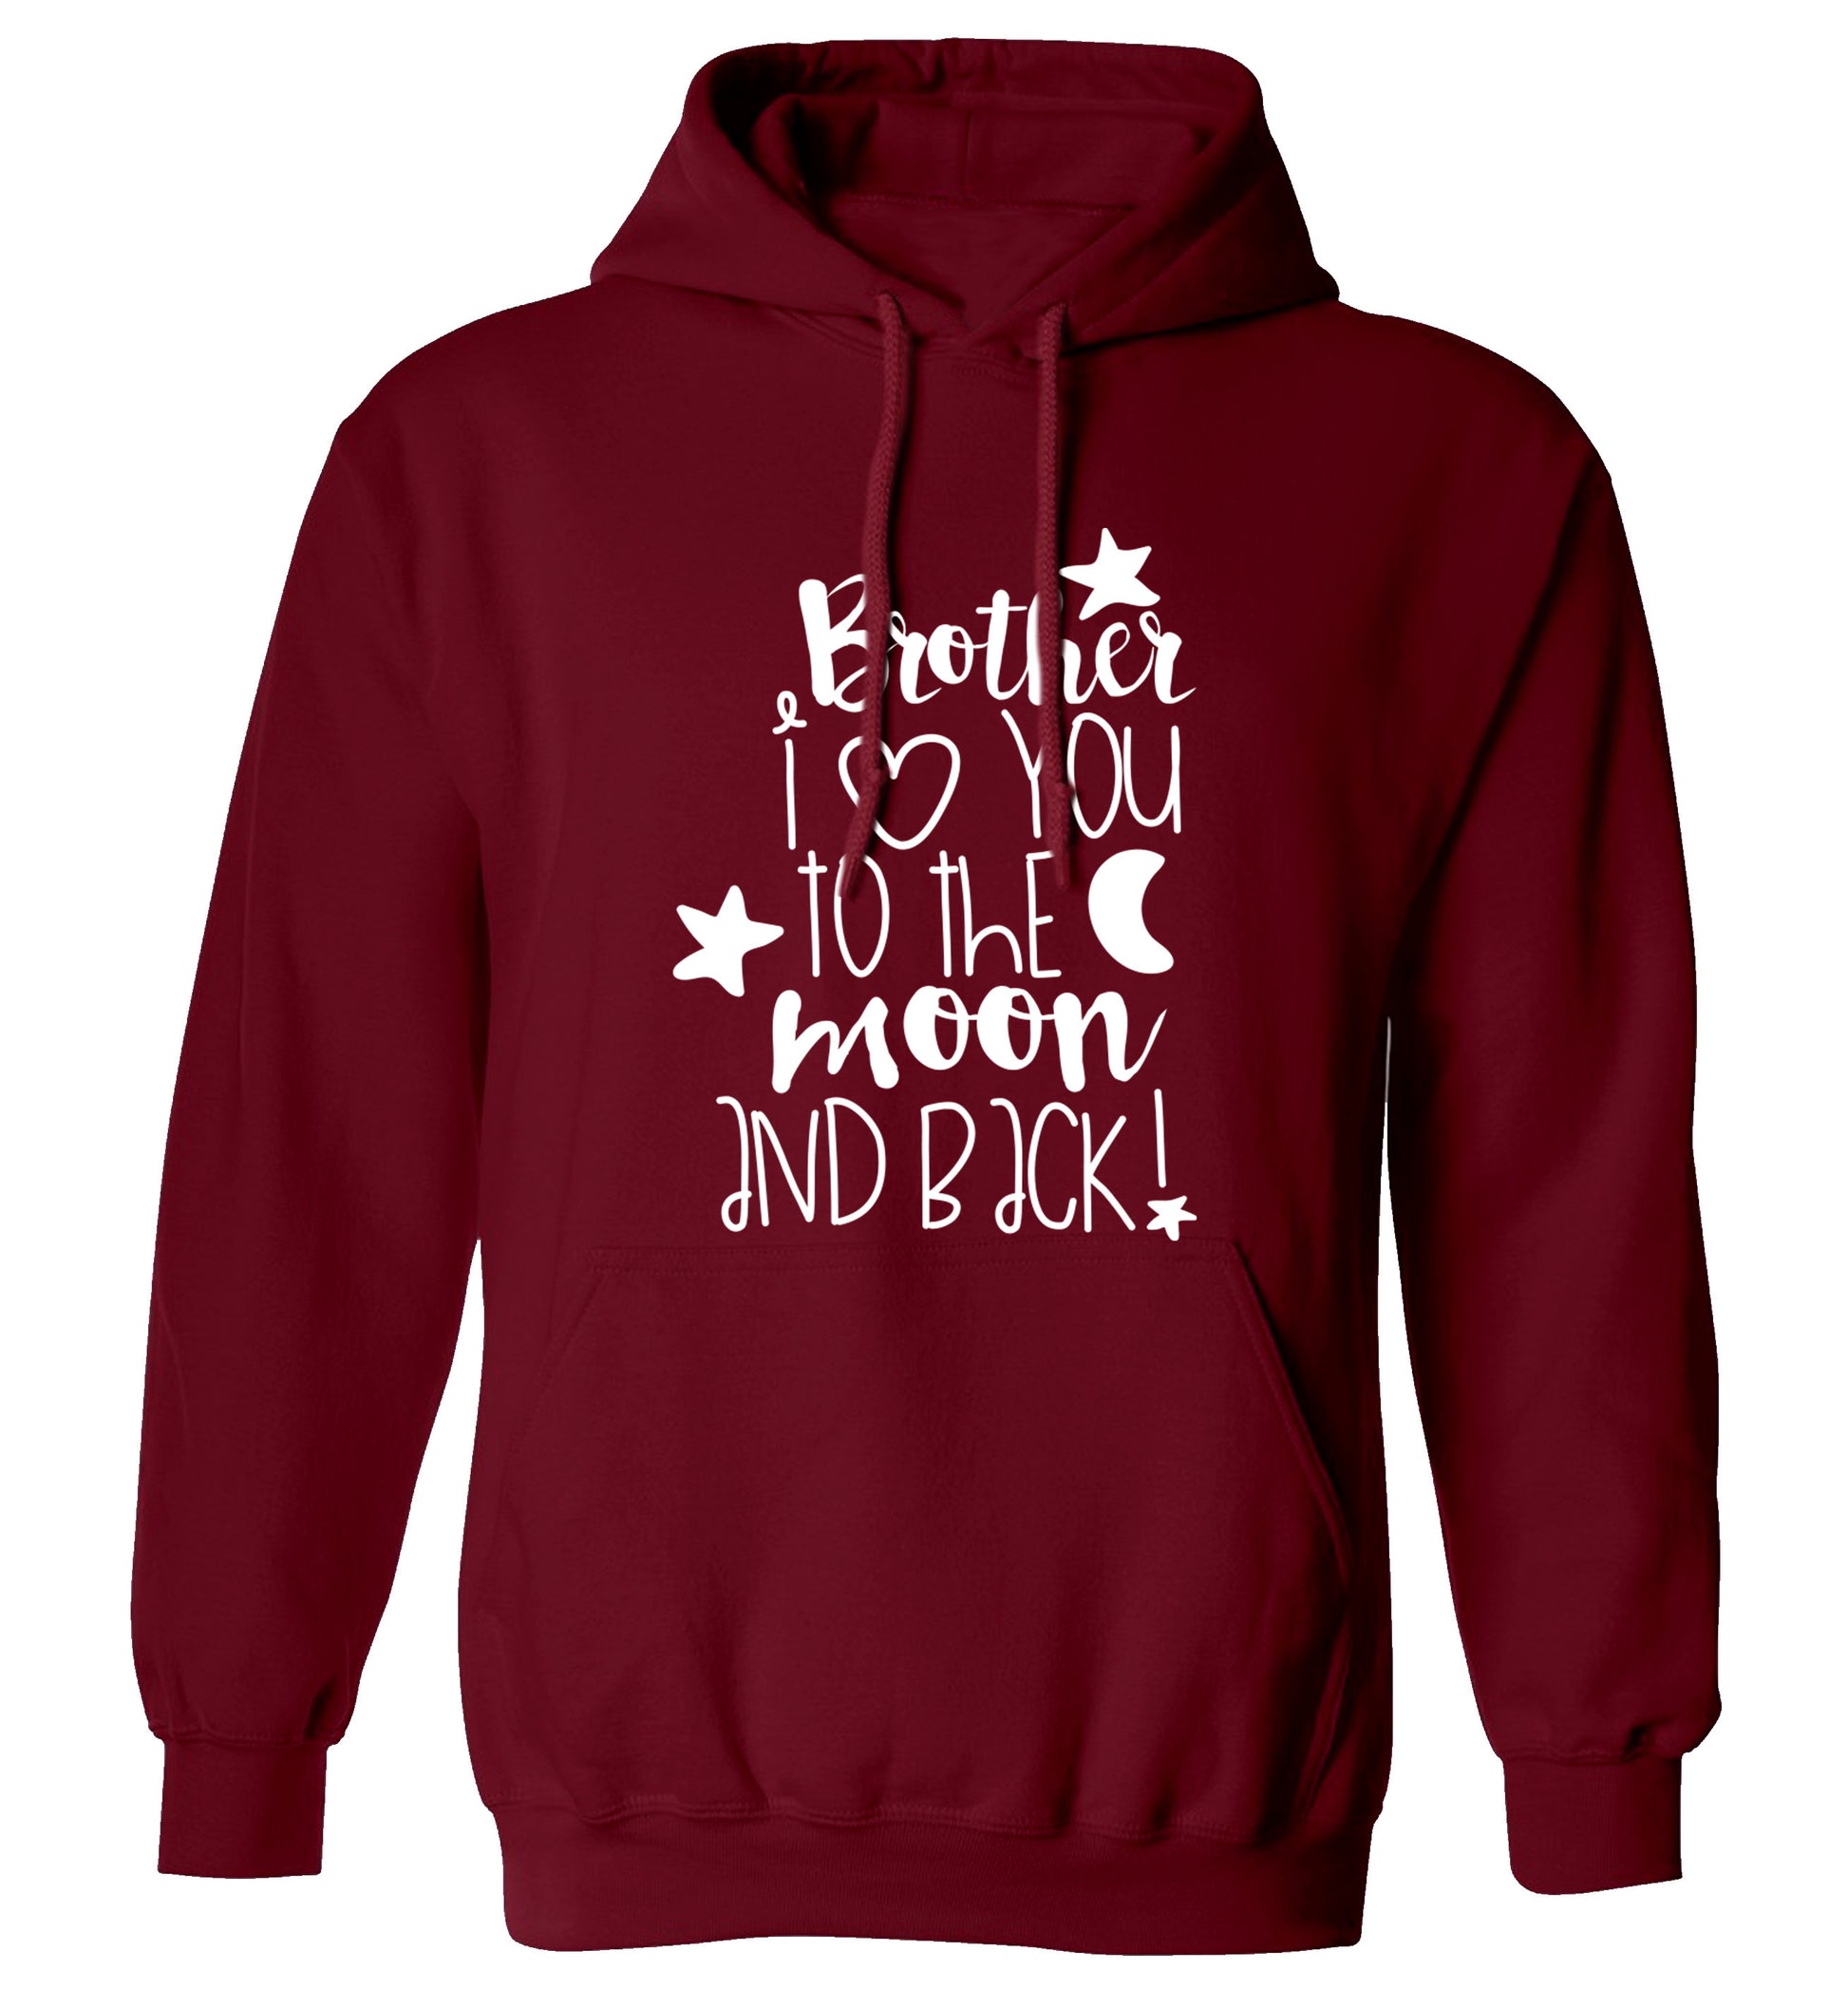 Brother I love you to the moon and back adults unisex maroon hoodie 2XL